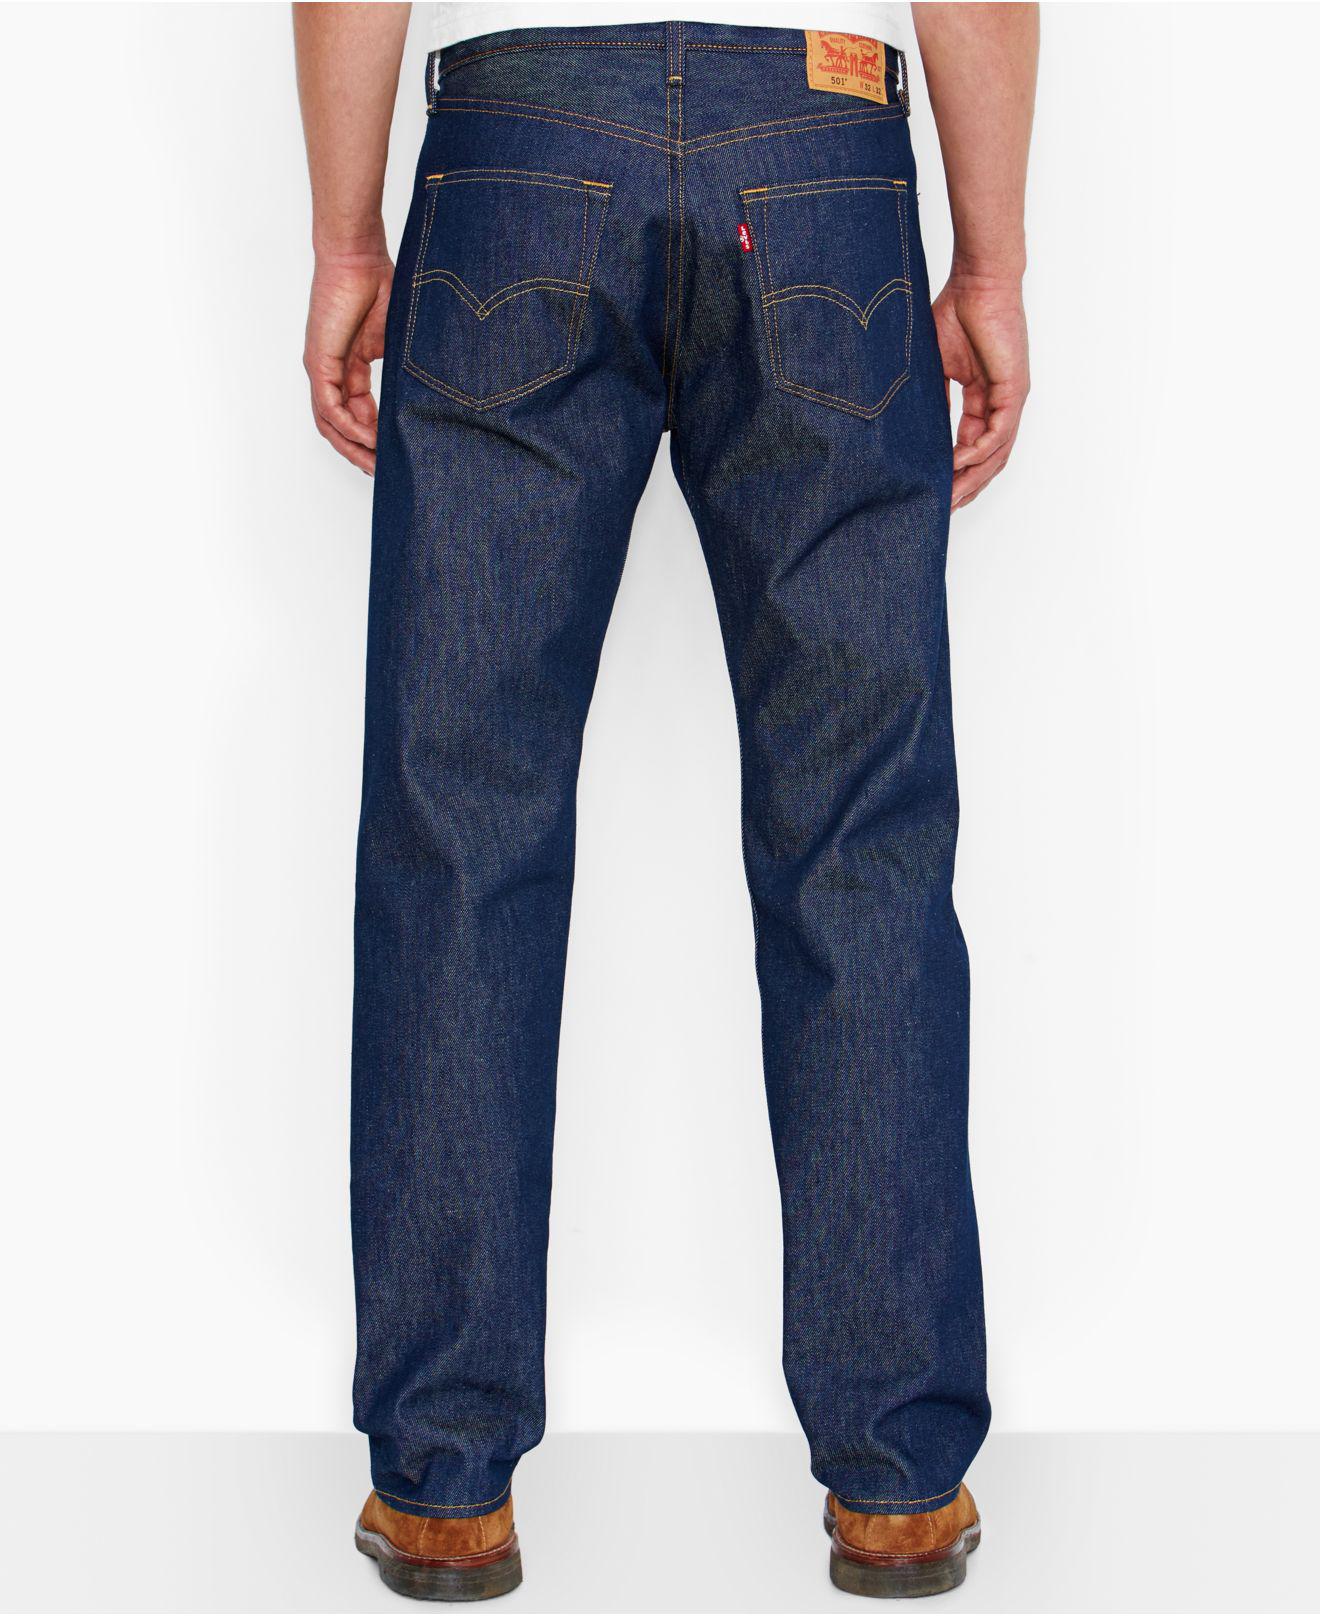 Levi's Denim Men's Big And Tall 501 Original Shrink To Fit Jeans in ...